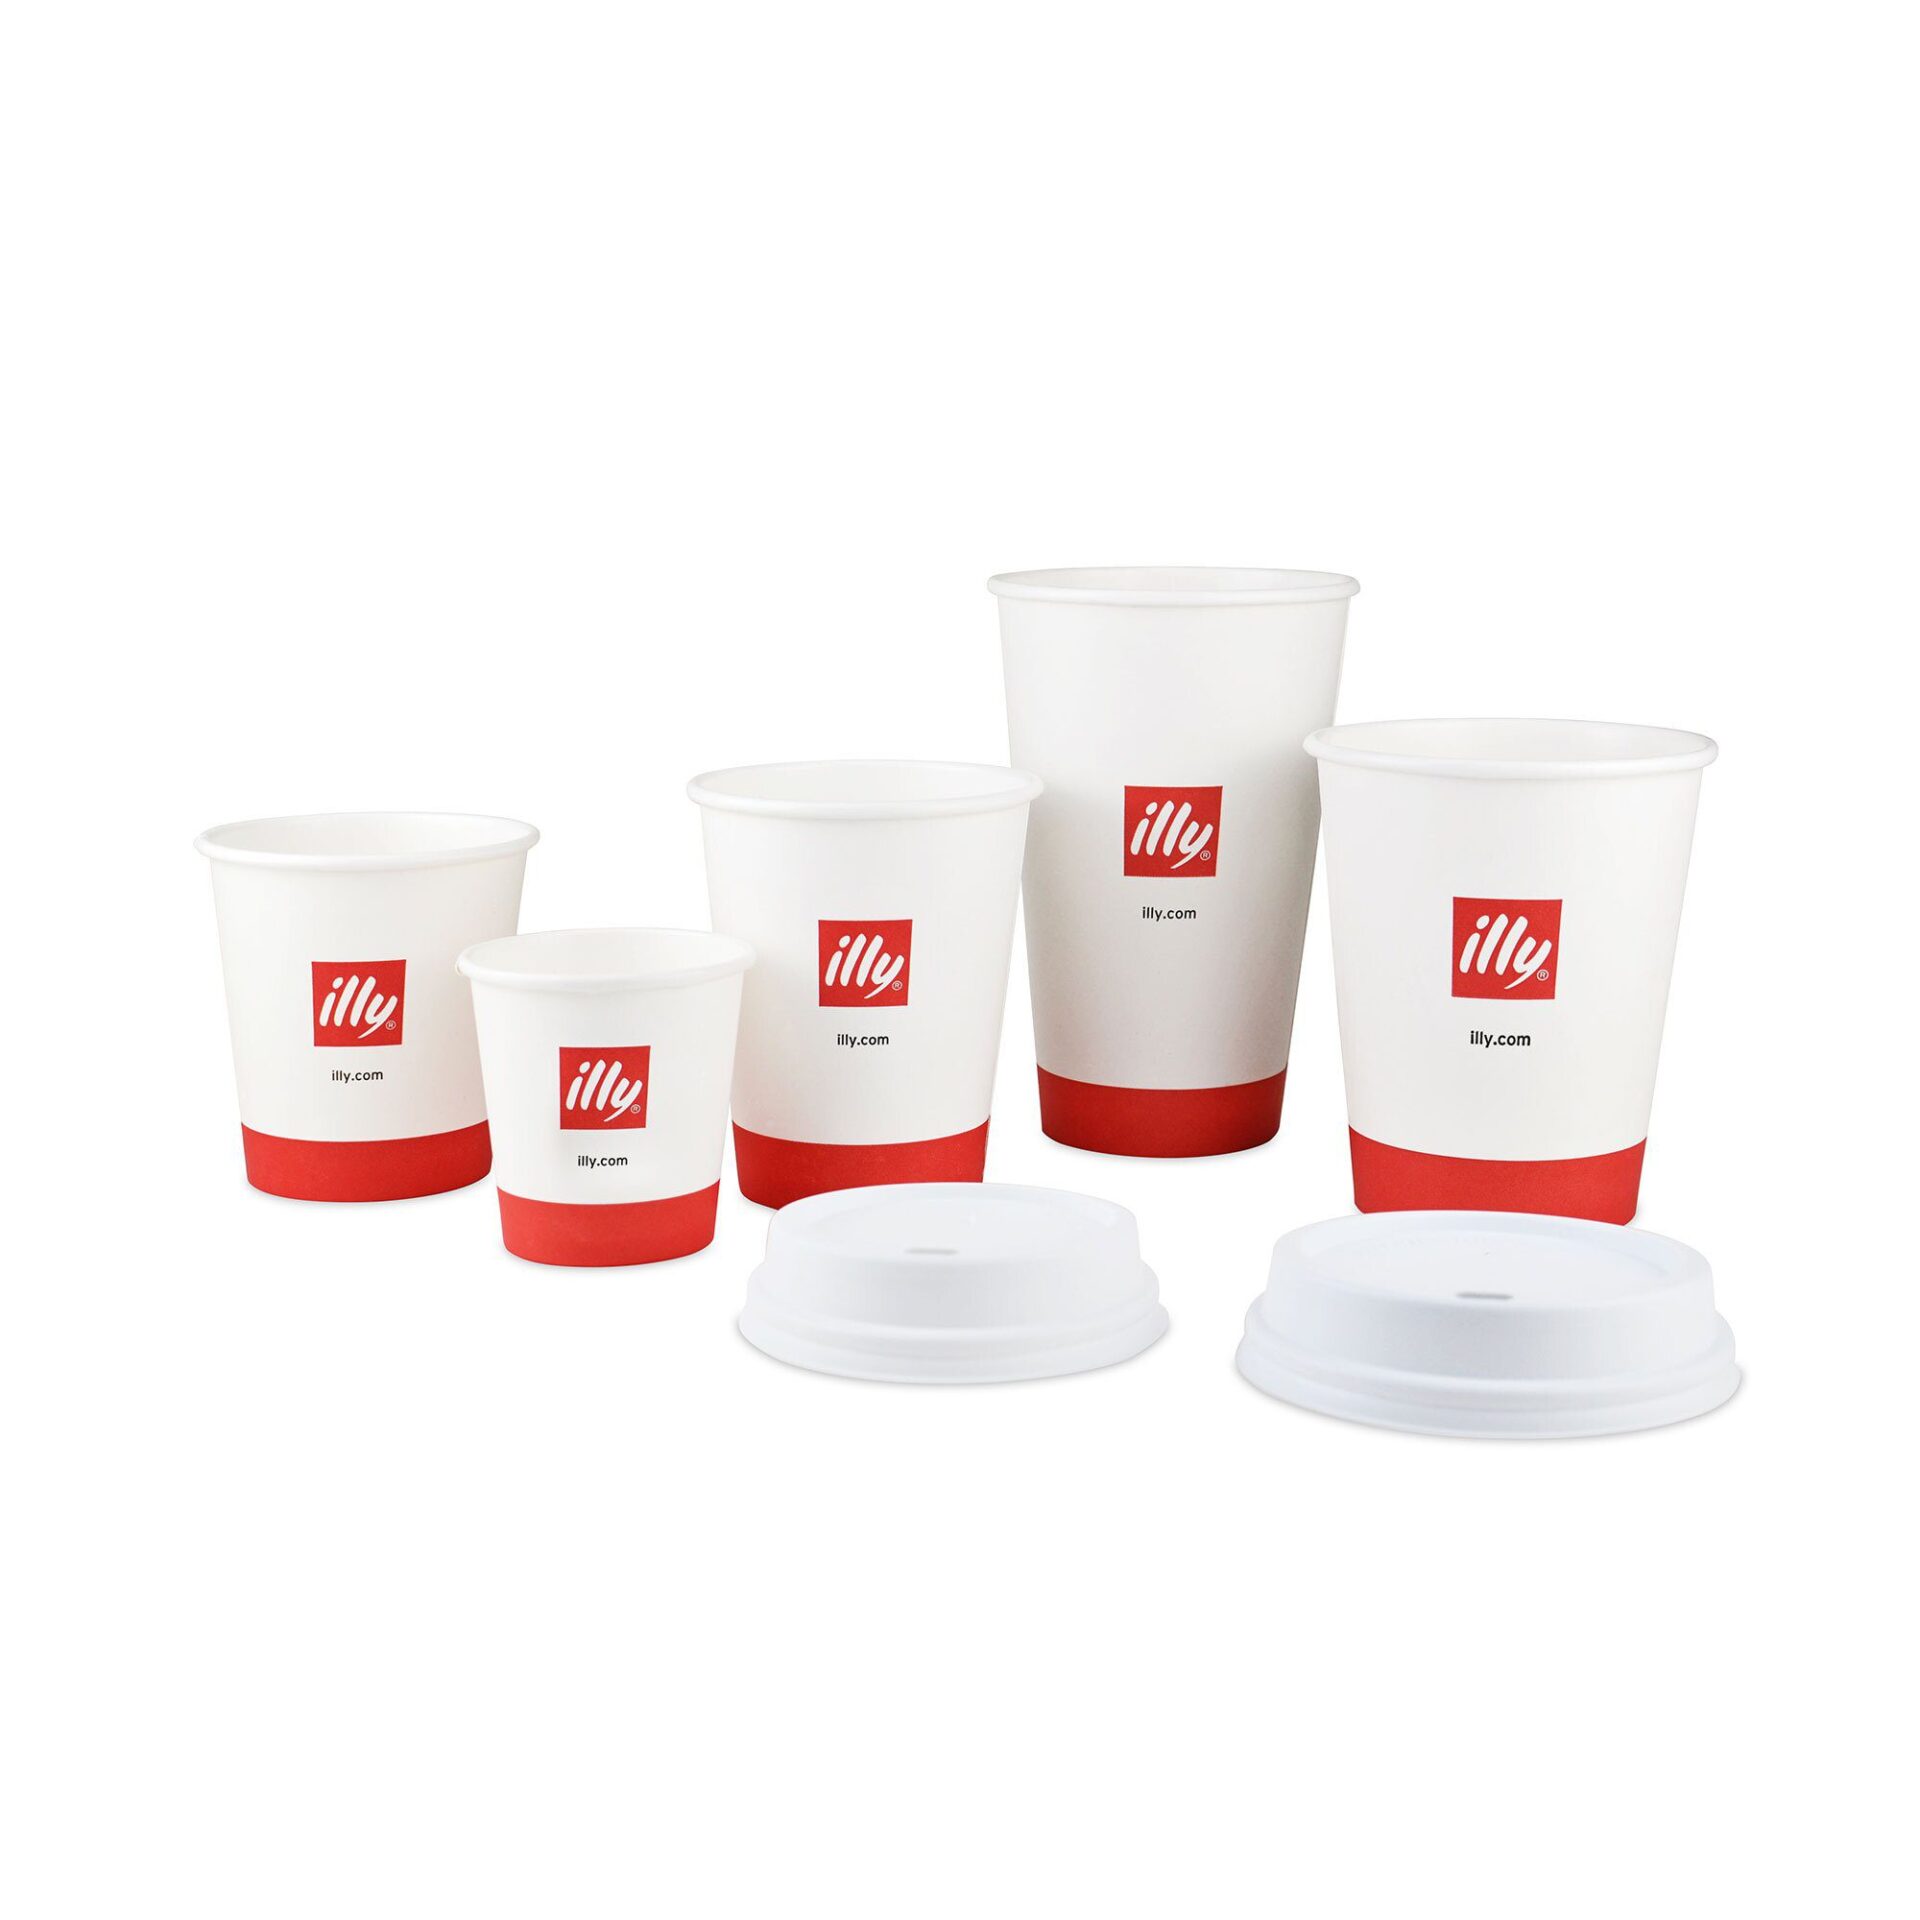 https://partimar.com/wp-content/uploads/2023/01/Paper-Cup-illy.jpg